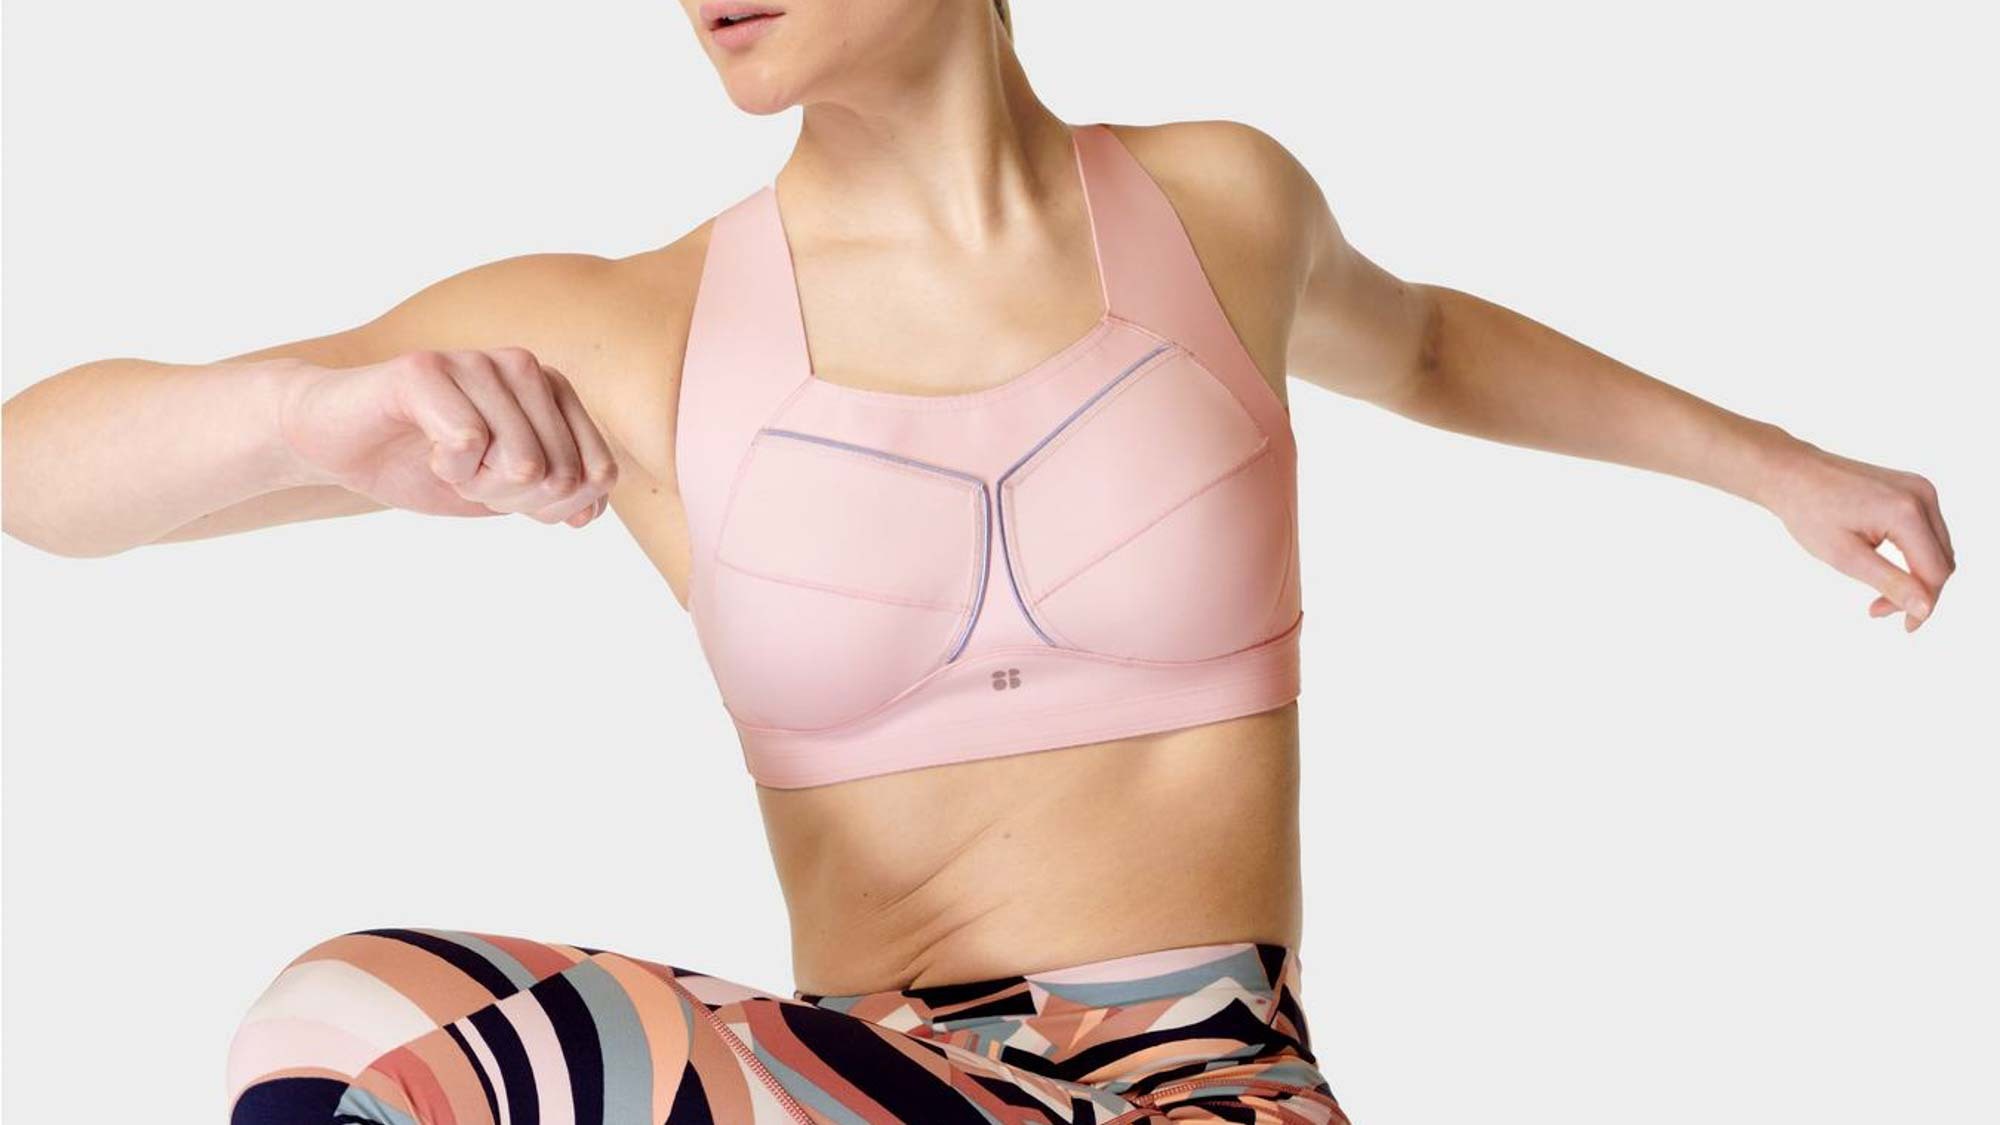 I review sports bras for a living — and this is one of the best I